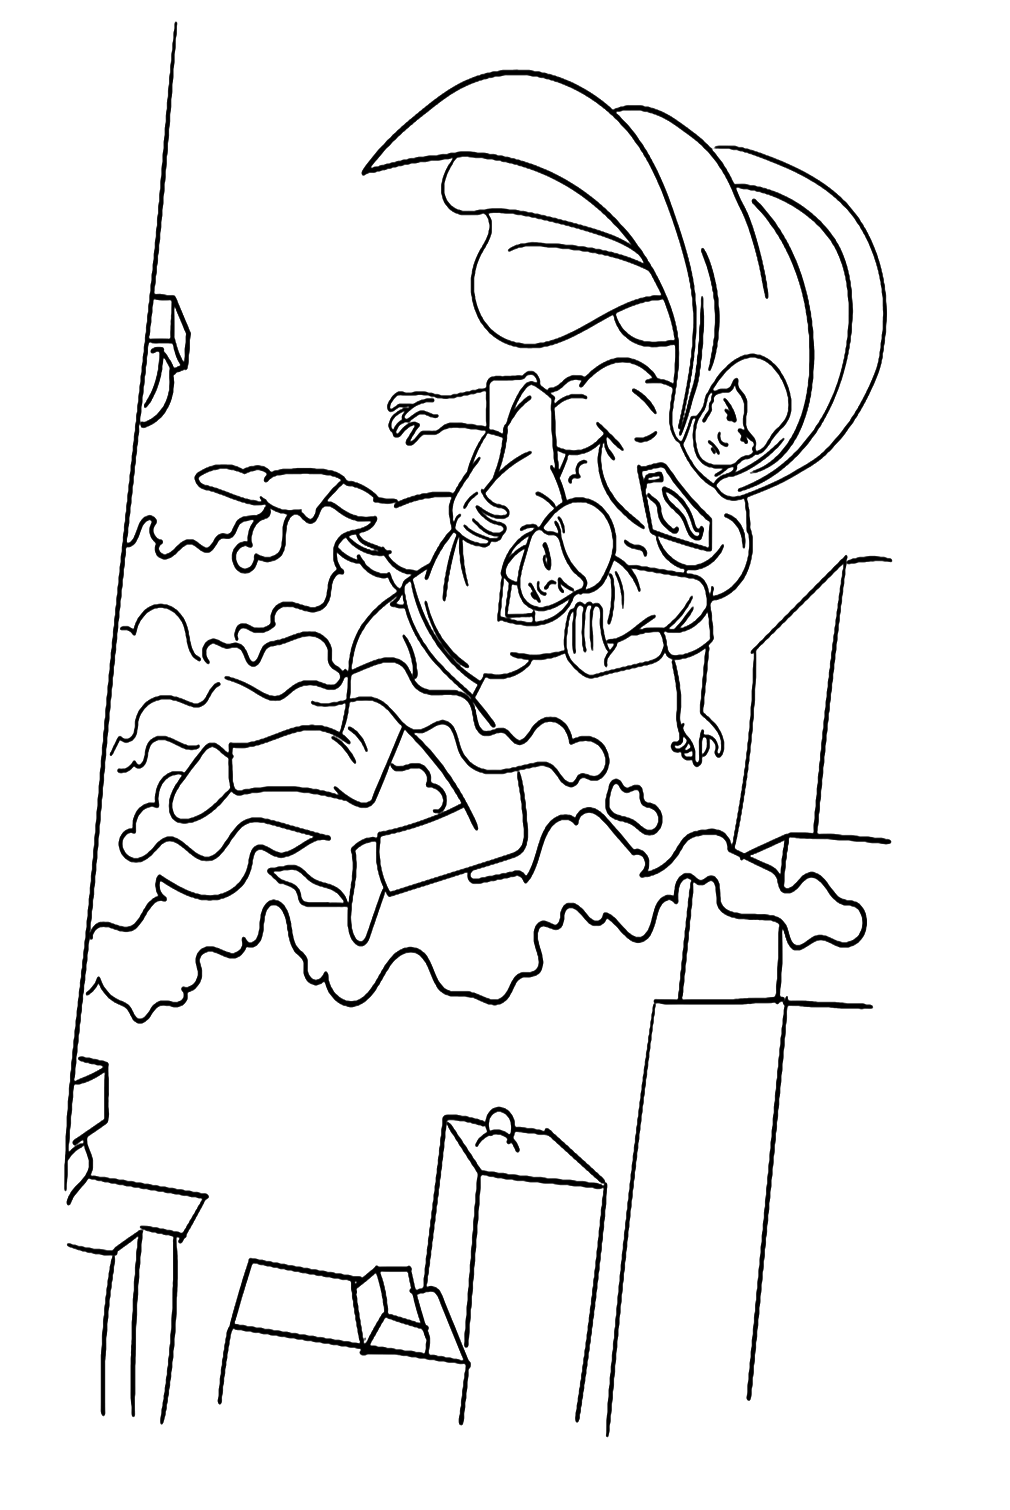 Superman Saving a Life Coloring Pages